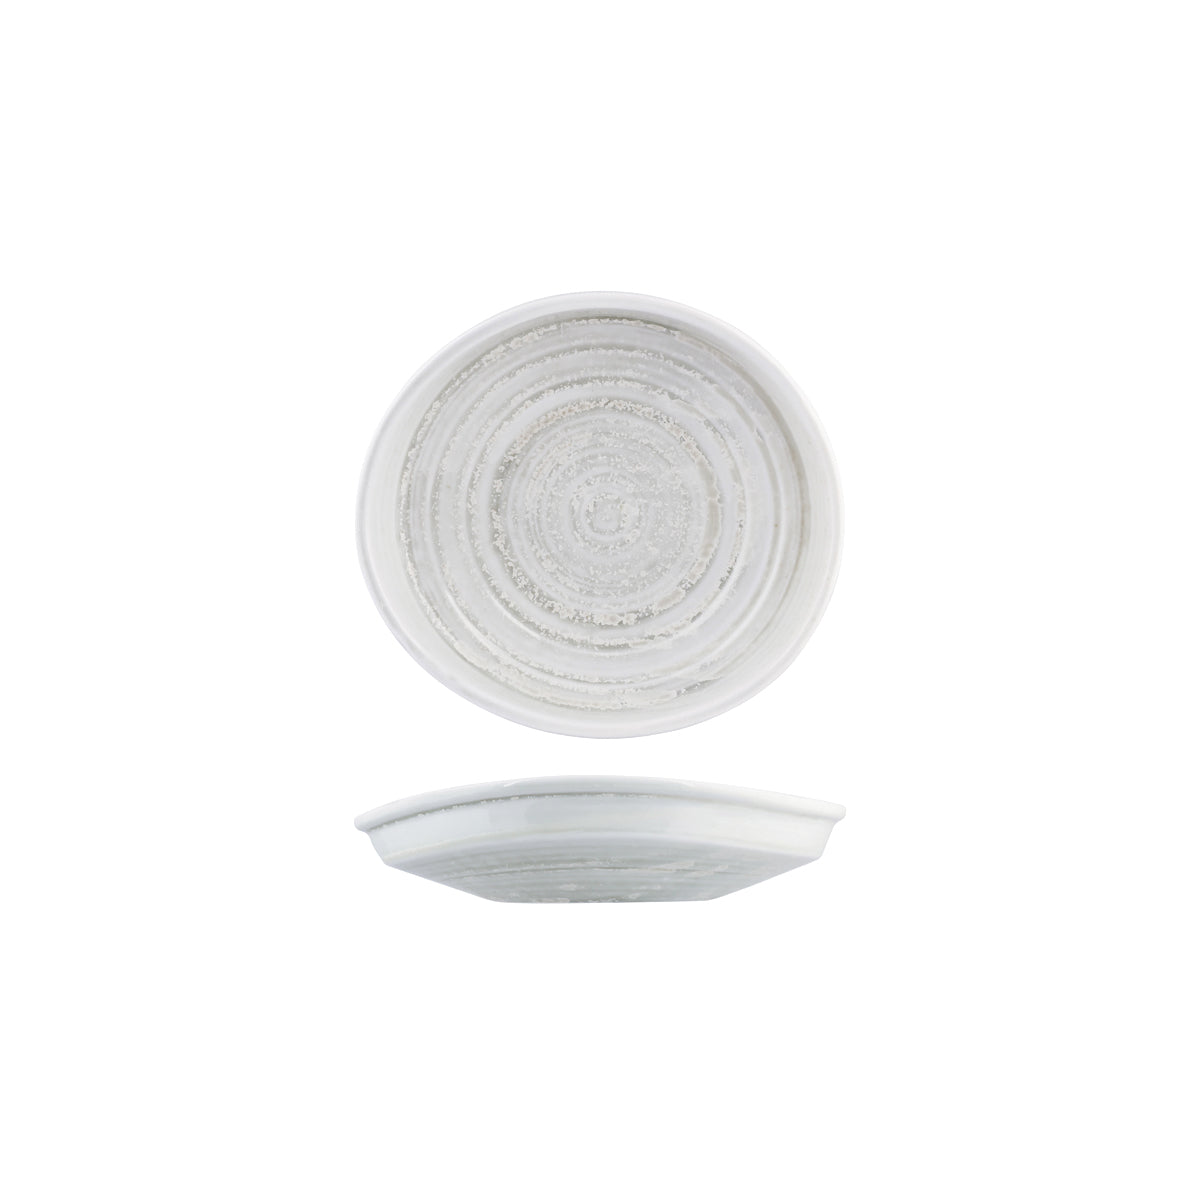 Organic Bowl-Plate - 205x185mm, Willow, Moda Porcelain from Moda Porcelain. made out of Porcelain and sold in boxes of 6. Hospitality quality at wholesale price with The Flying Fork! 